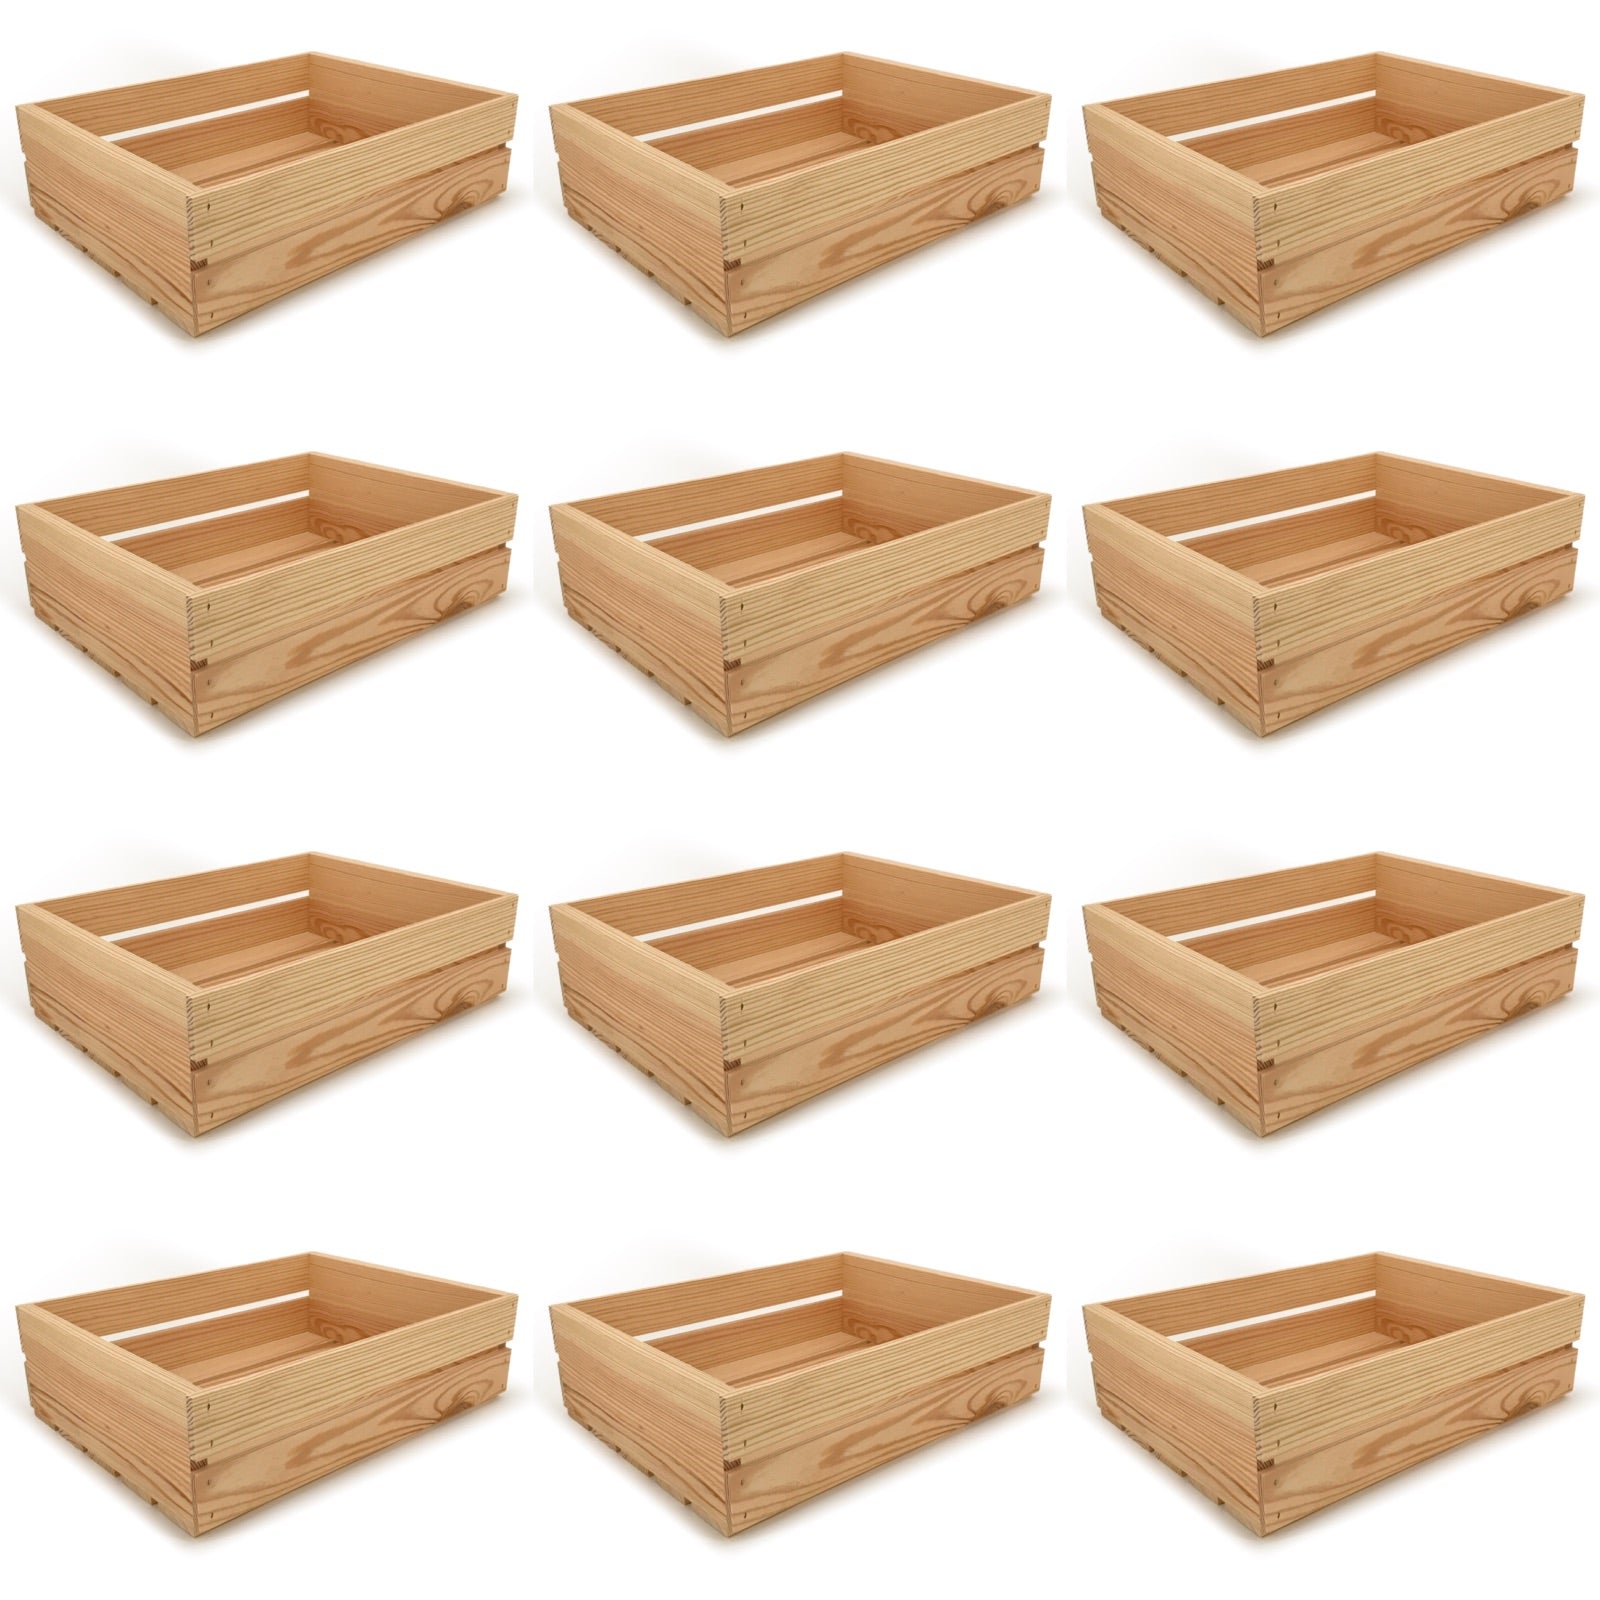 12 Small wooden crates 18x14x5.25